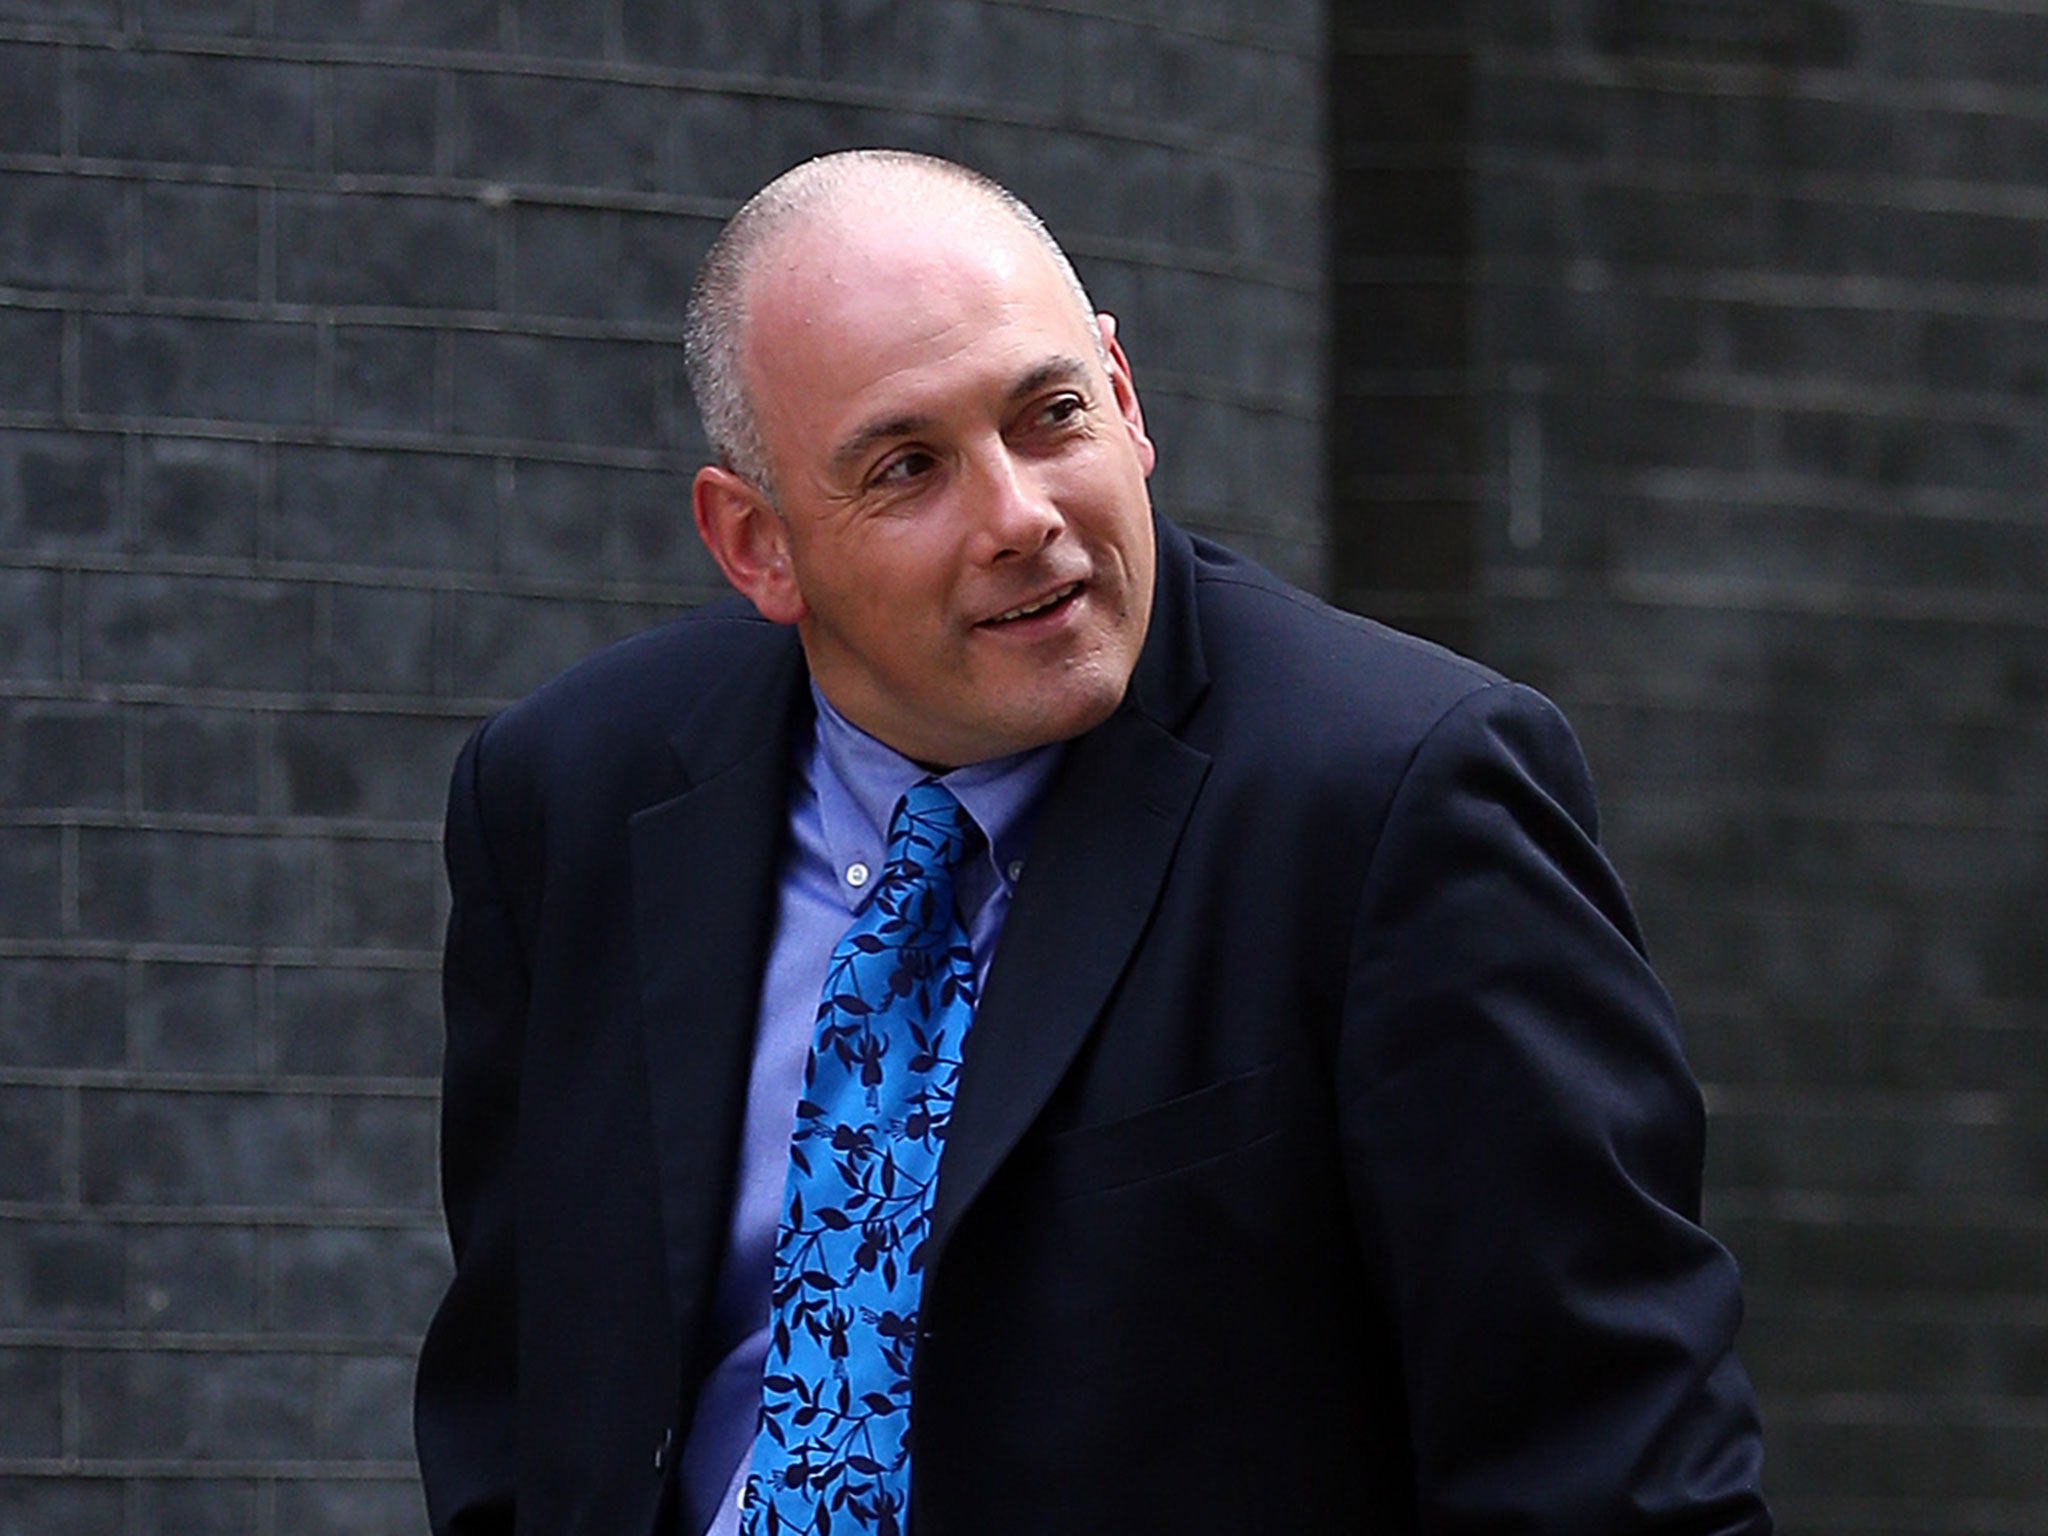 Rob Halfon, chair of the education select committee, has called for more funding to schools